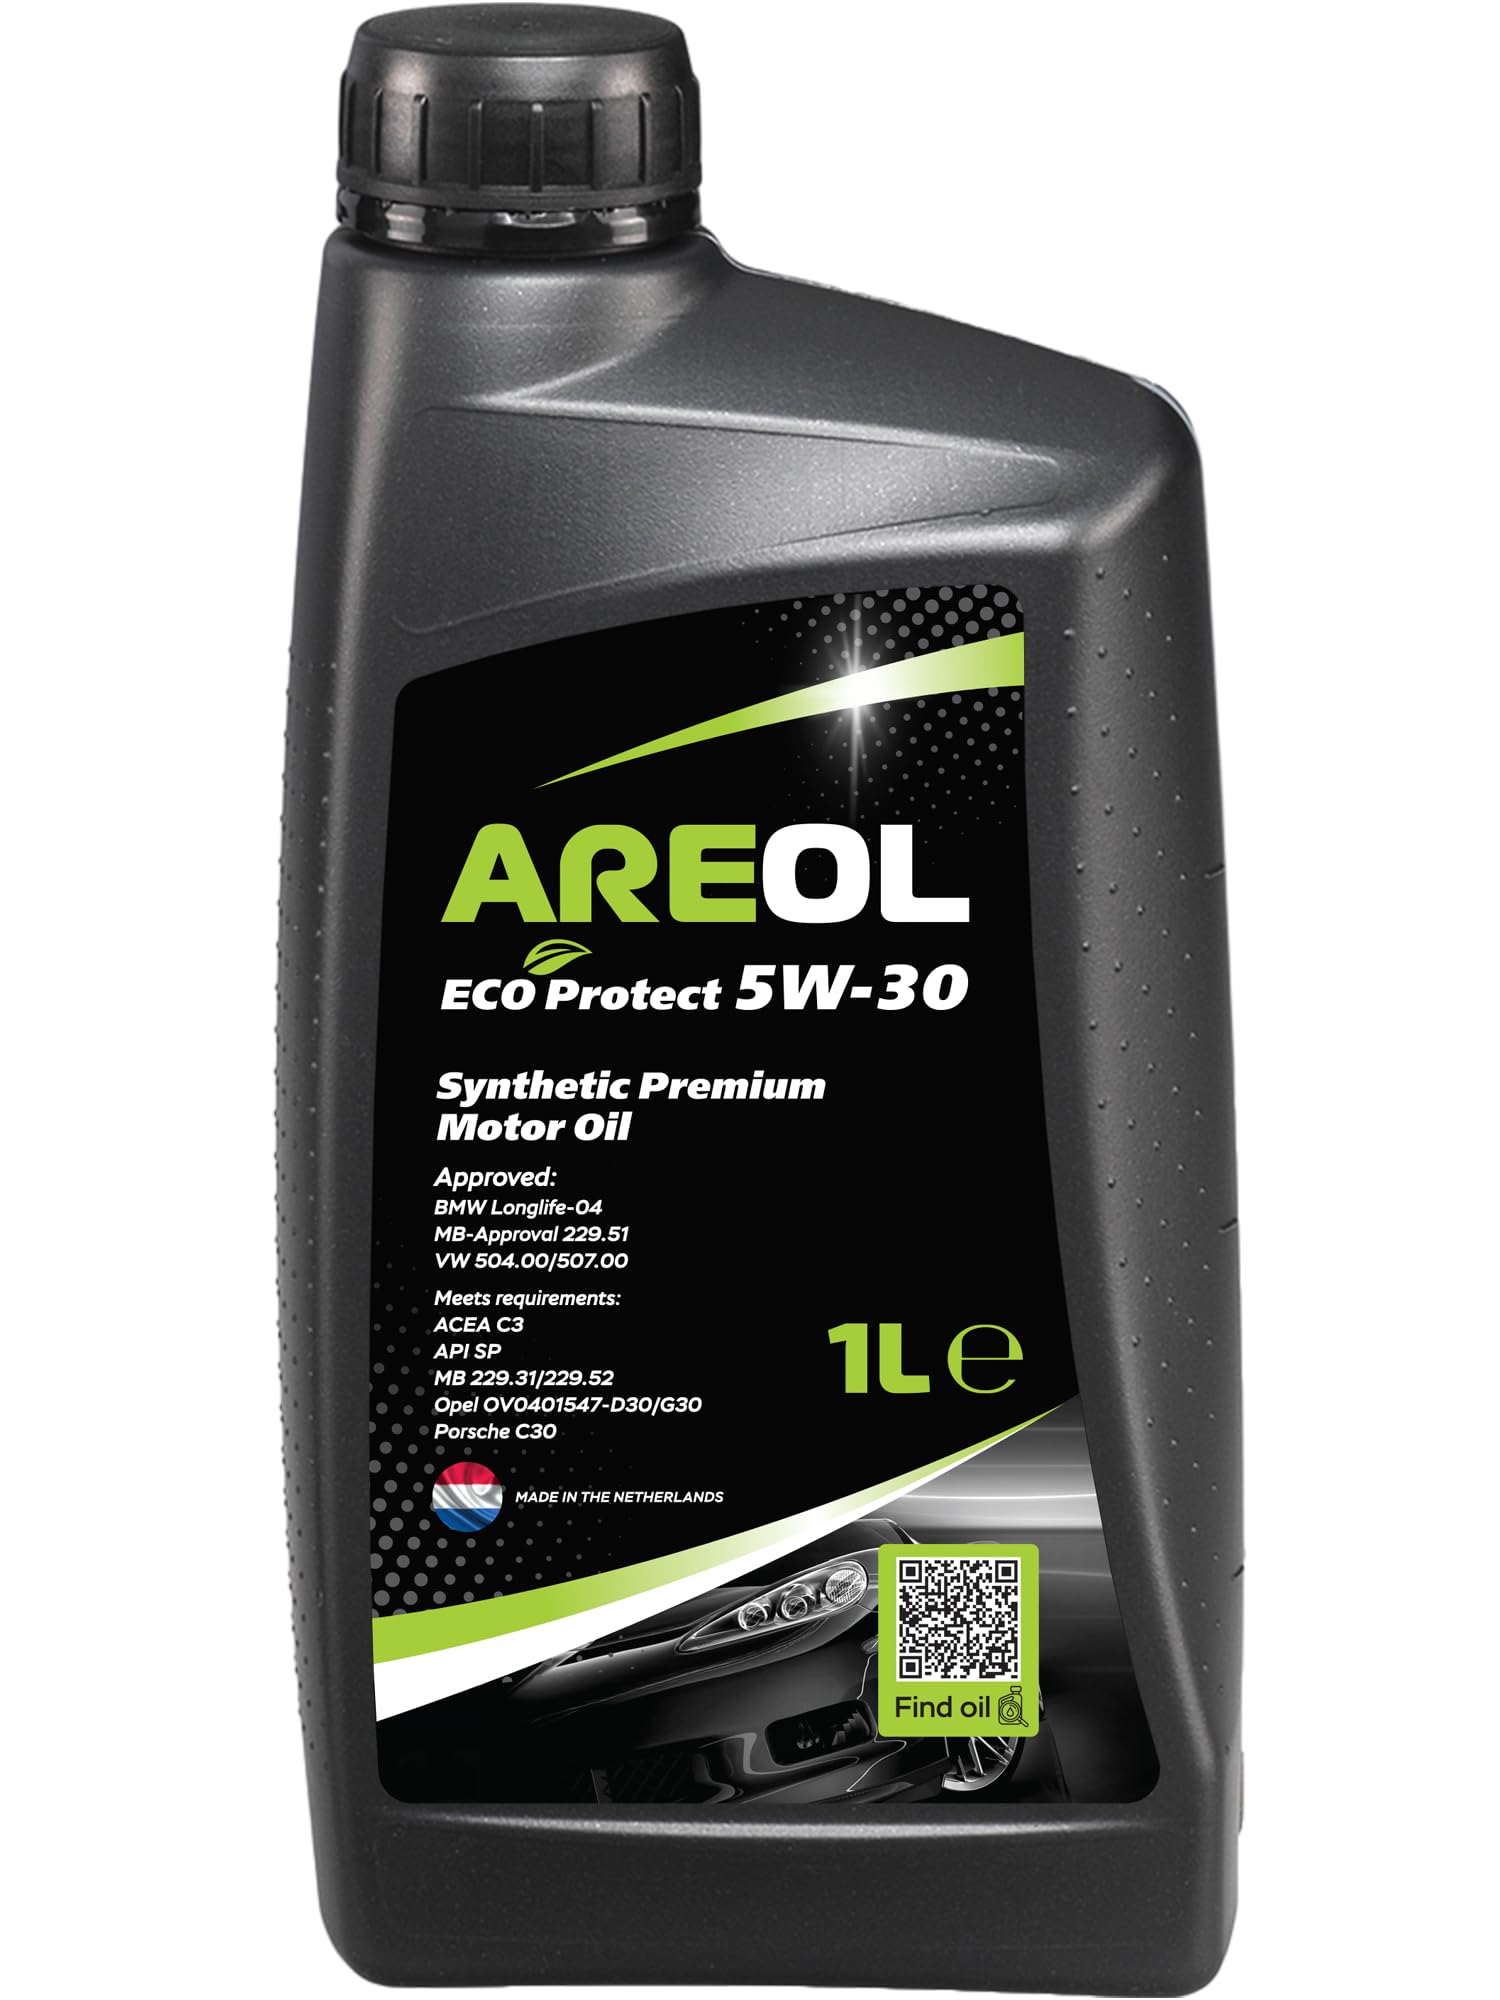 AREOL ECO Protect 5W-30 Motoröl, 1 Liter von AREOL